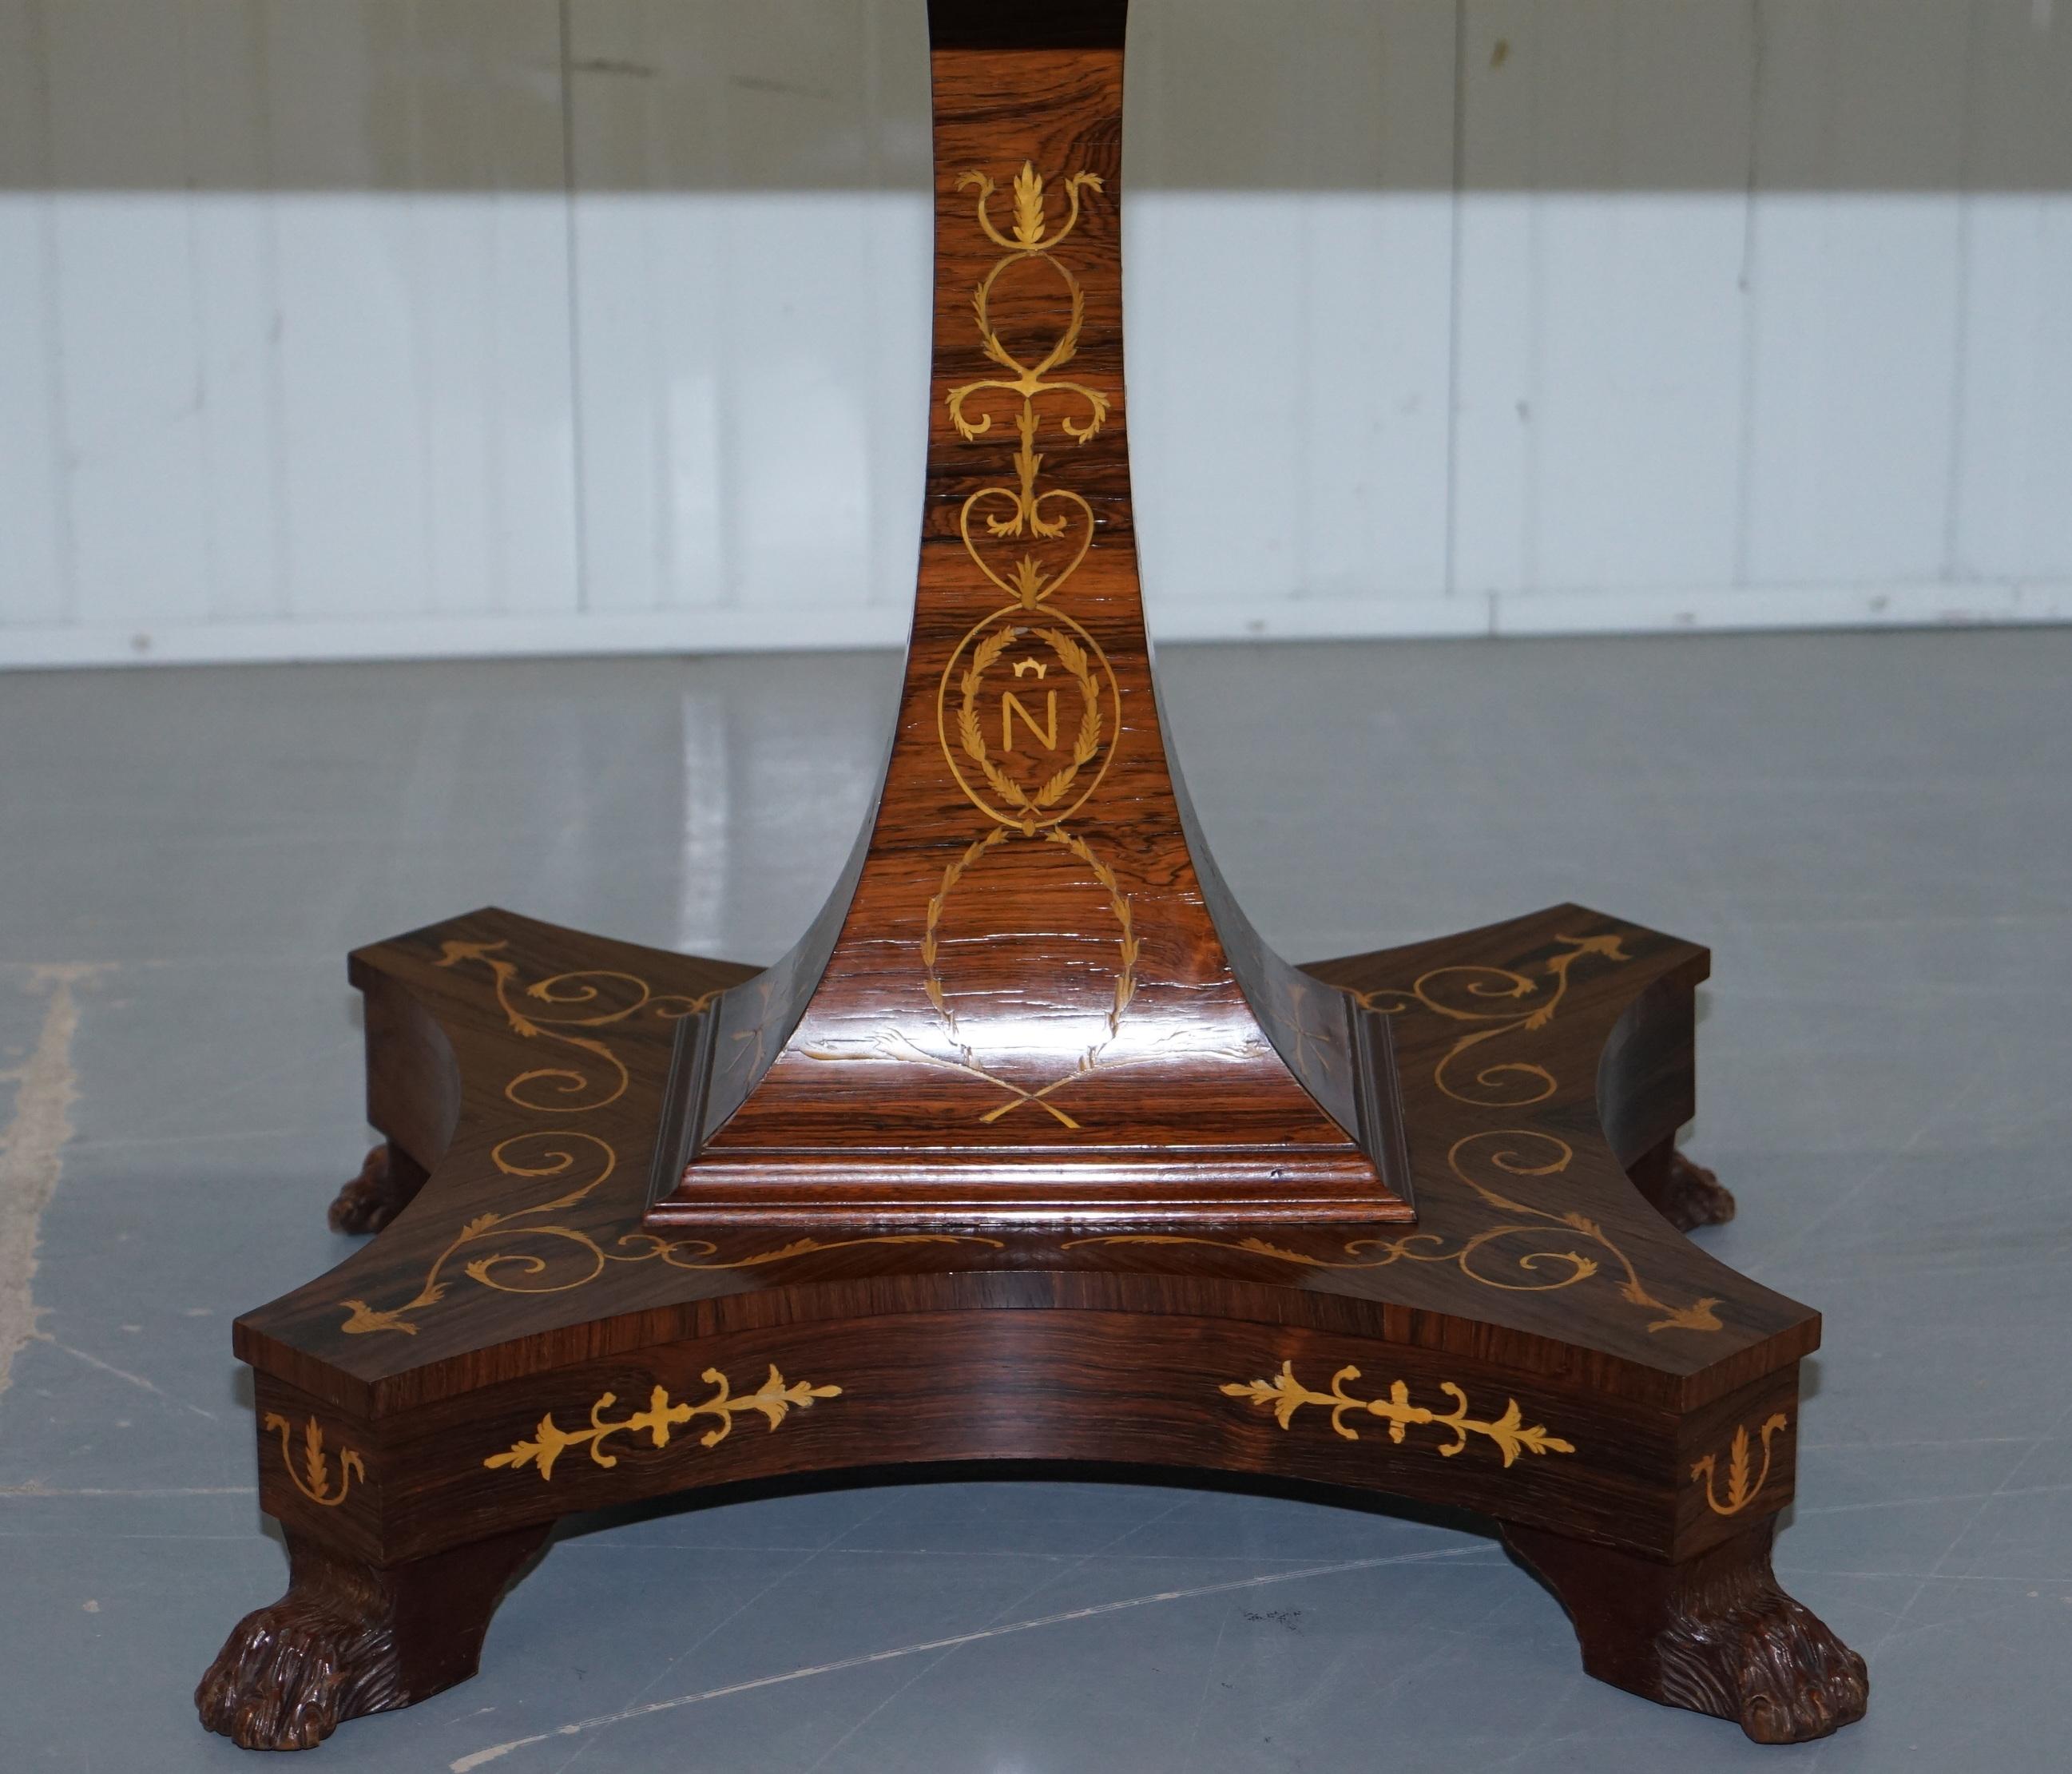 Hardwood Napoleon Empire Chess Games Table Redwood Carlo Beccalli Palace Fontainebleau